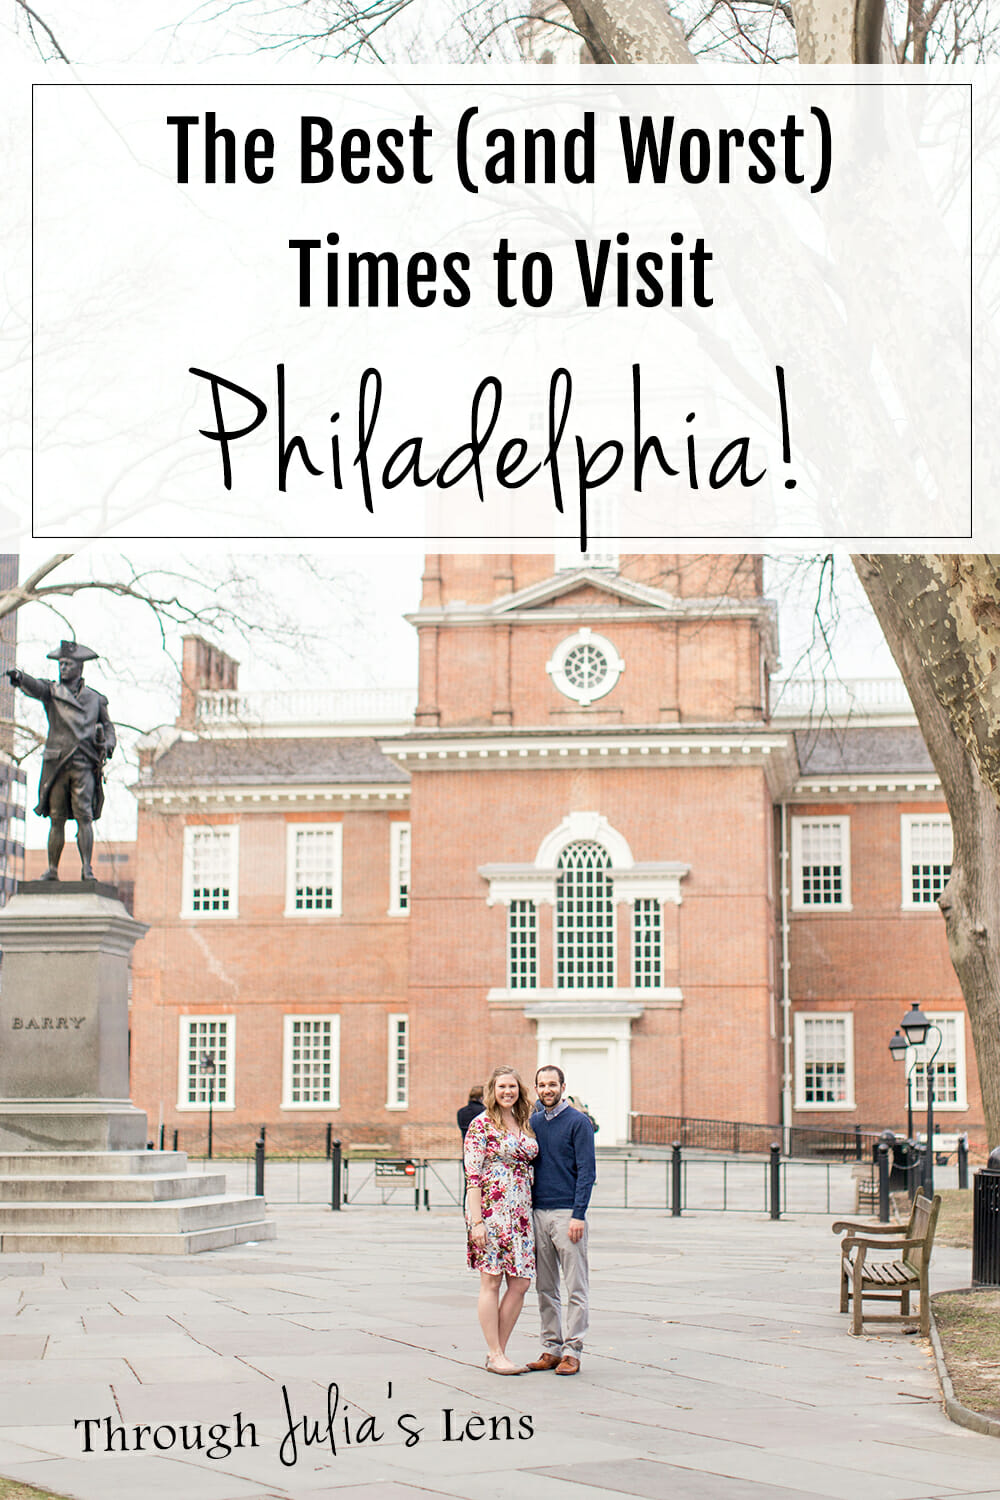 You got to @Visit Philly and everything this adventurous city has to o